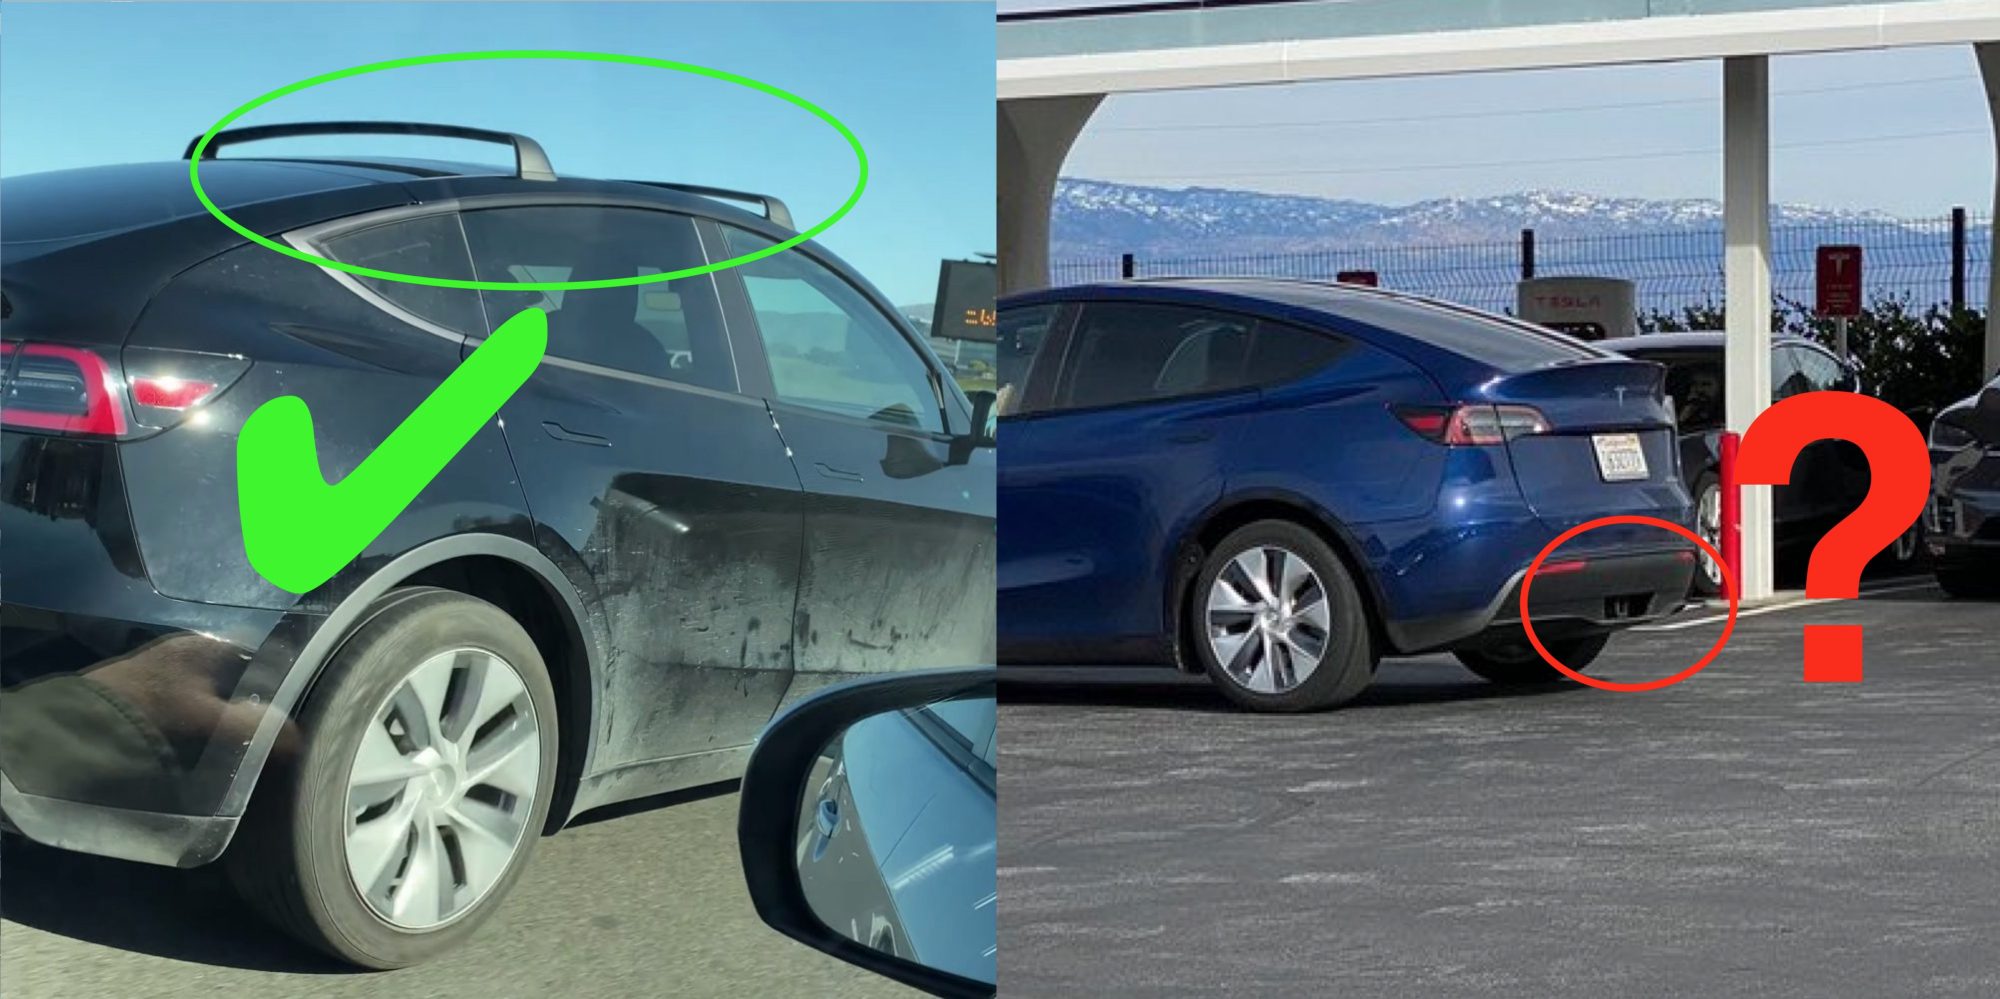 Tesla Model Y towing capability teased with rear cover plate for